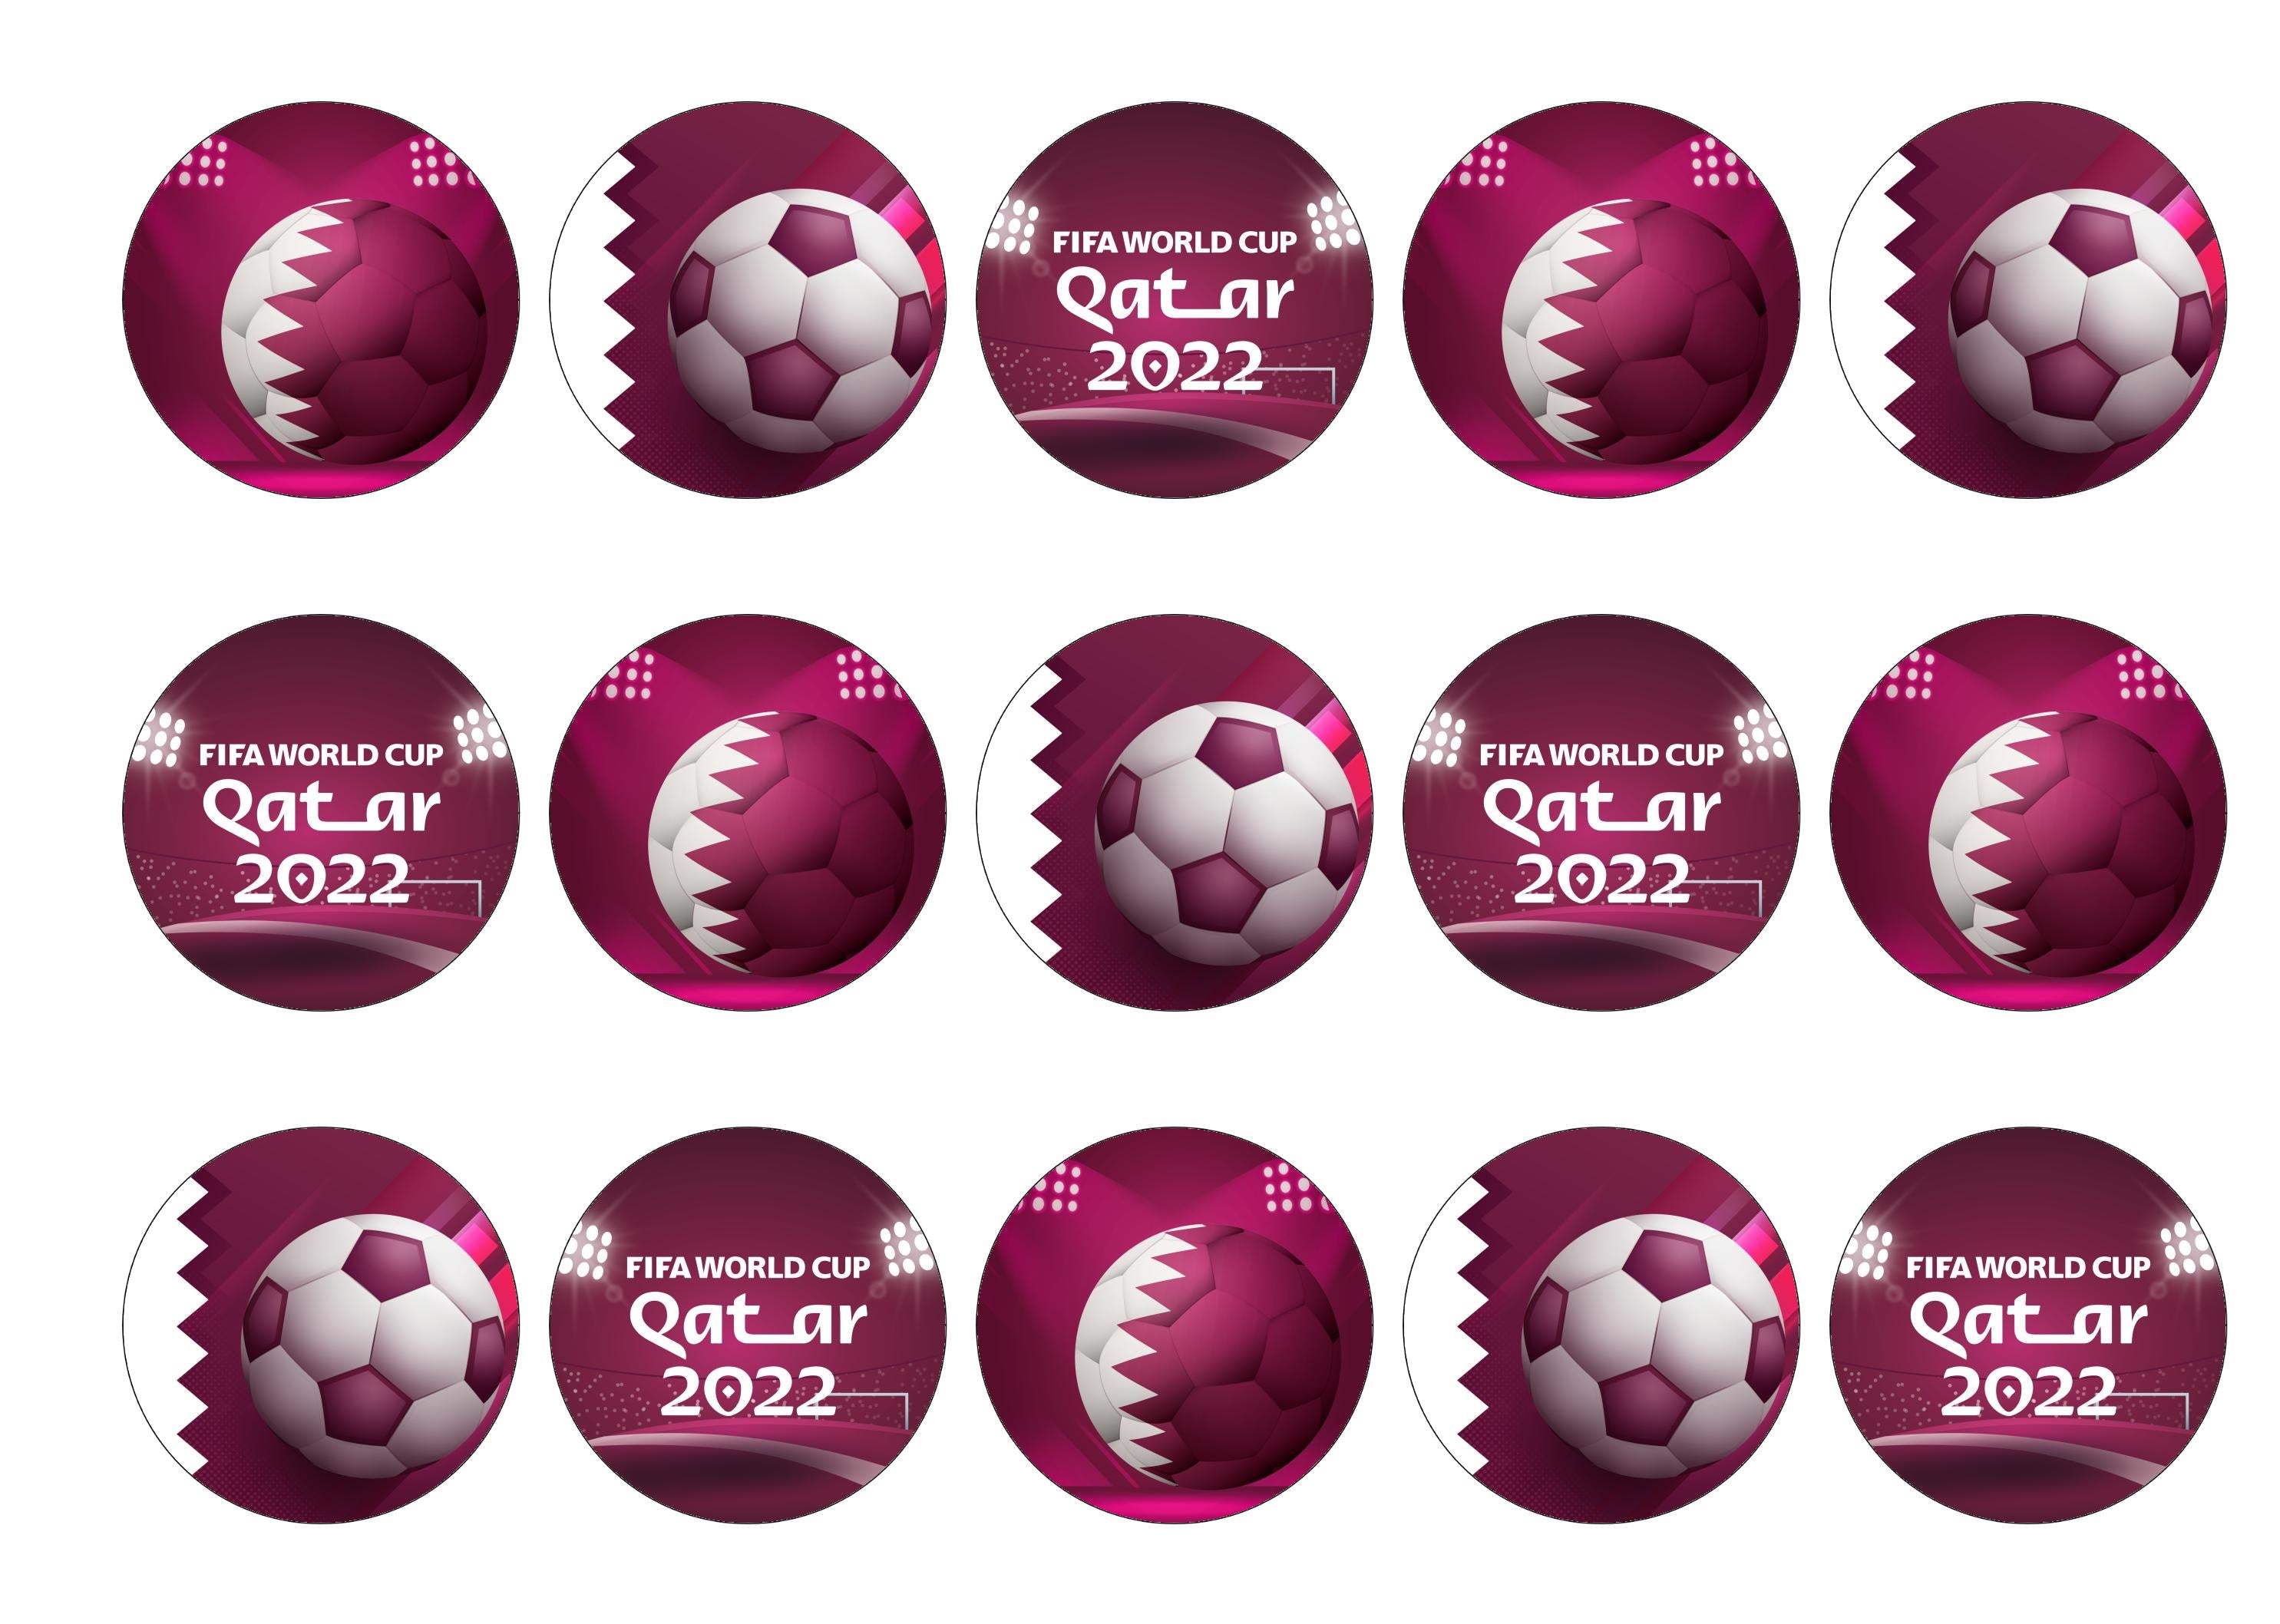 15 Cupcake Toppers with images representing the FIFA World Cup Qatar 2022